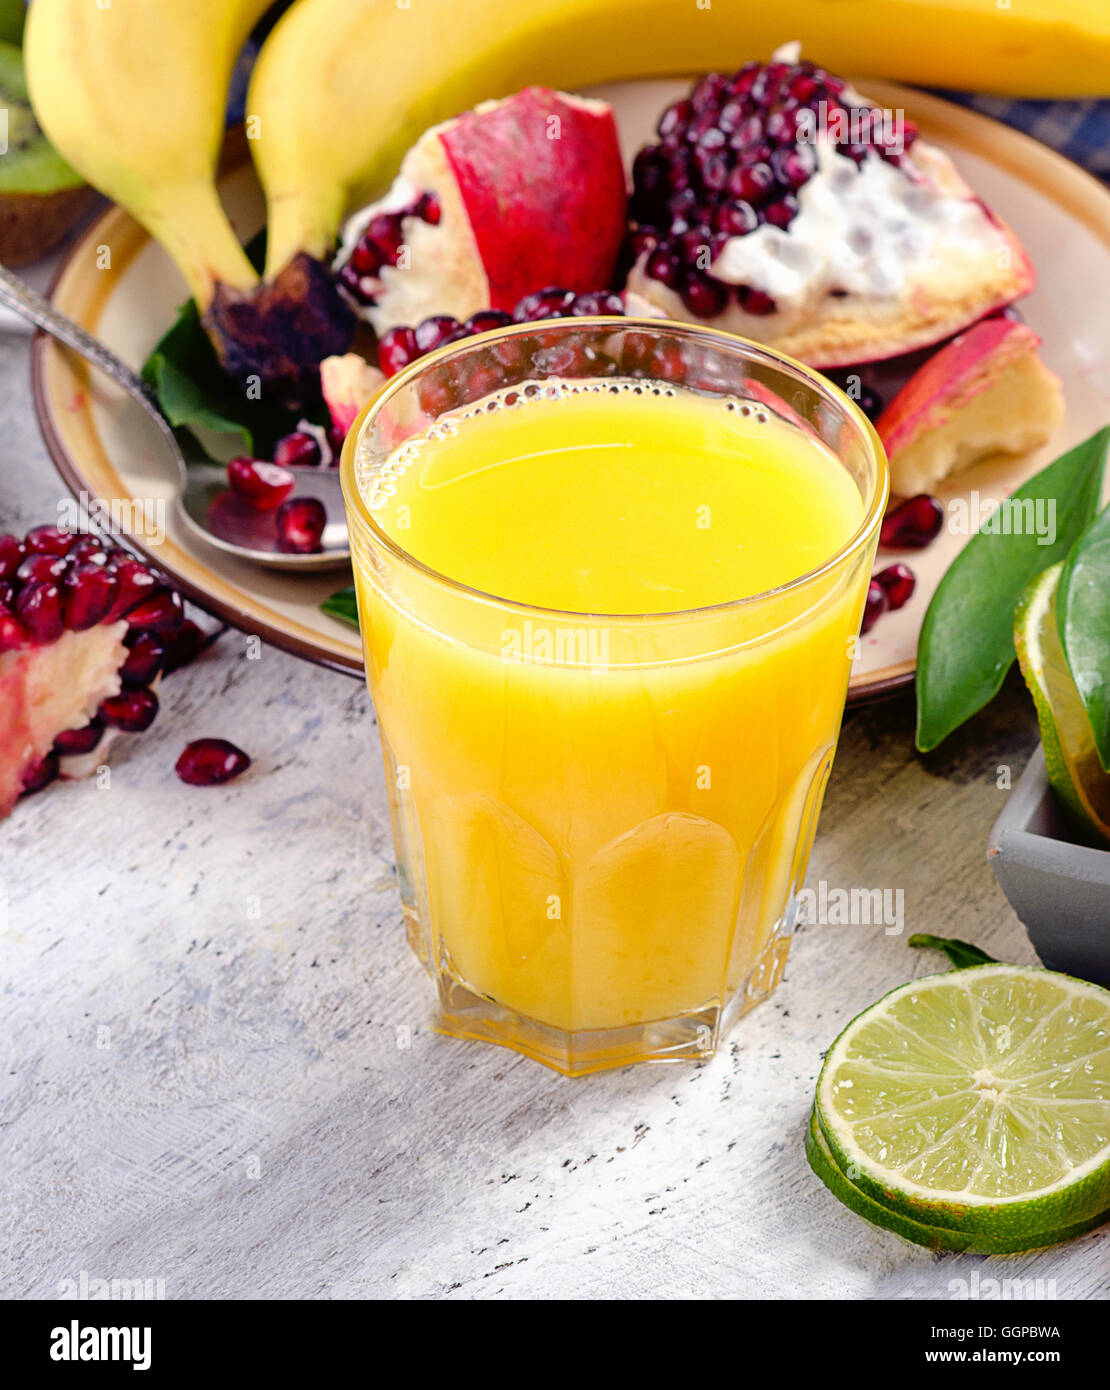 Citrus juice, fruits and berries. Healthy eating. Top view Stock Photo